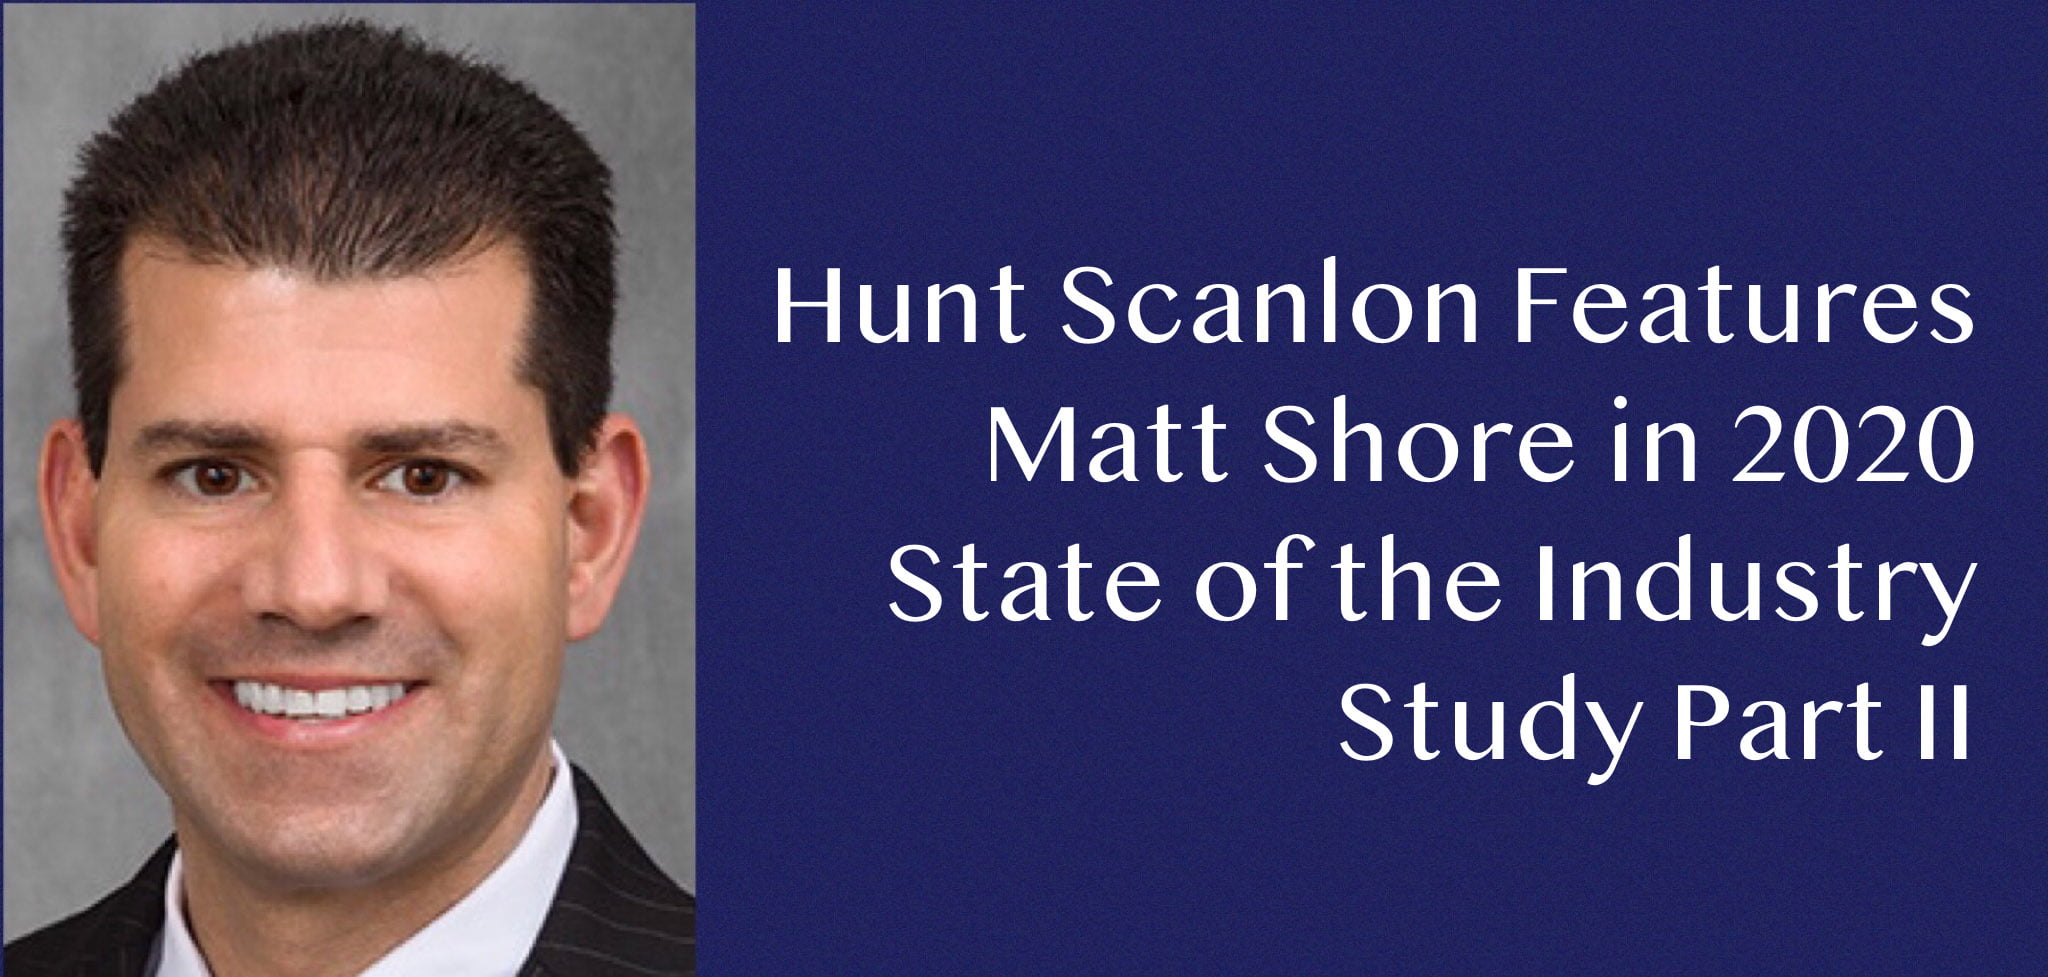 Hunt Scanlon Features Matt Shore in their 2020 State of the Industry Study Part II